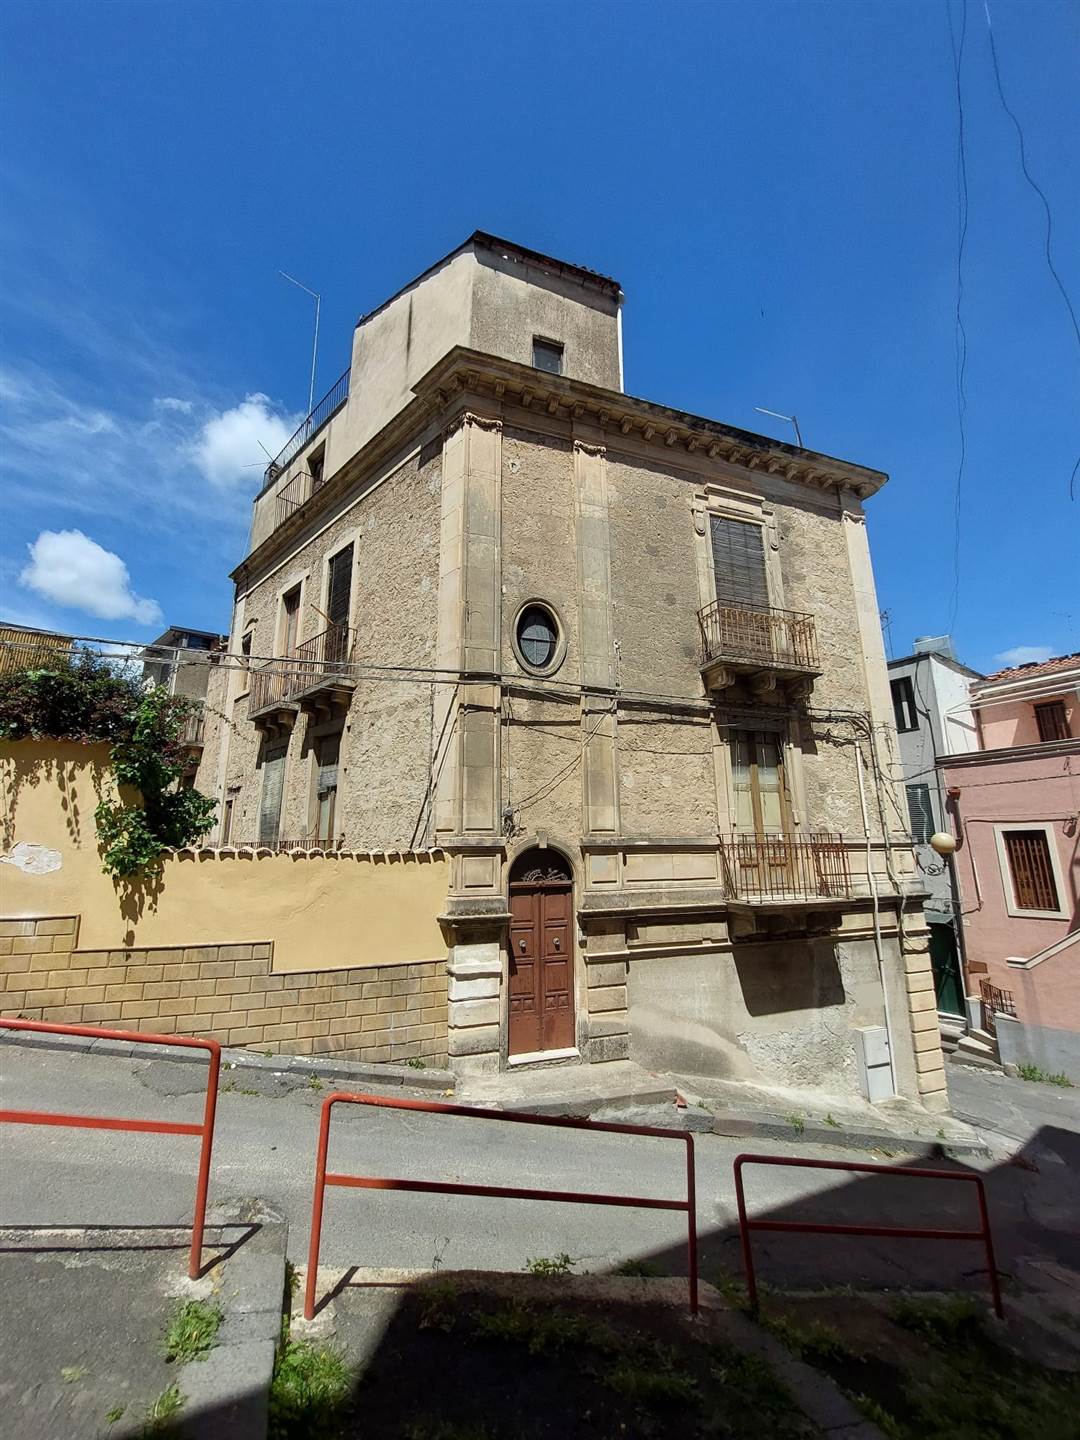 CENTRO, LENTINI, Single house for sale of 160 Sq. mt., Be restored, Heating Non-existent, placed at Ground on 4, composed by: 8 Rooms, Little kitchen,